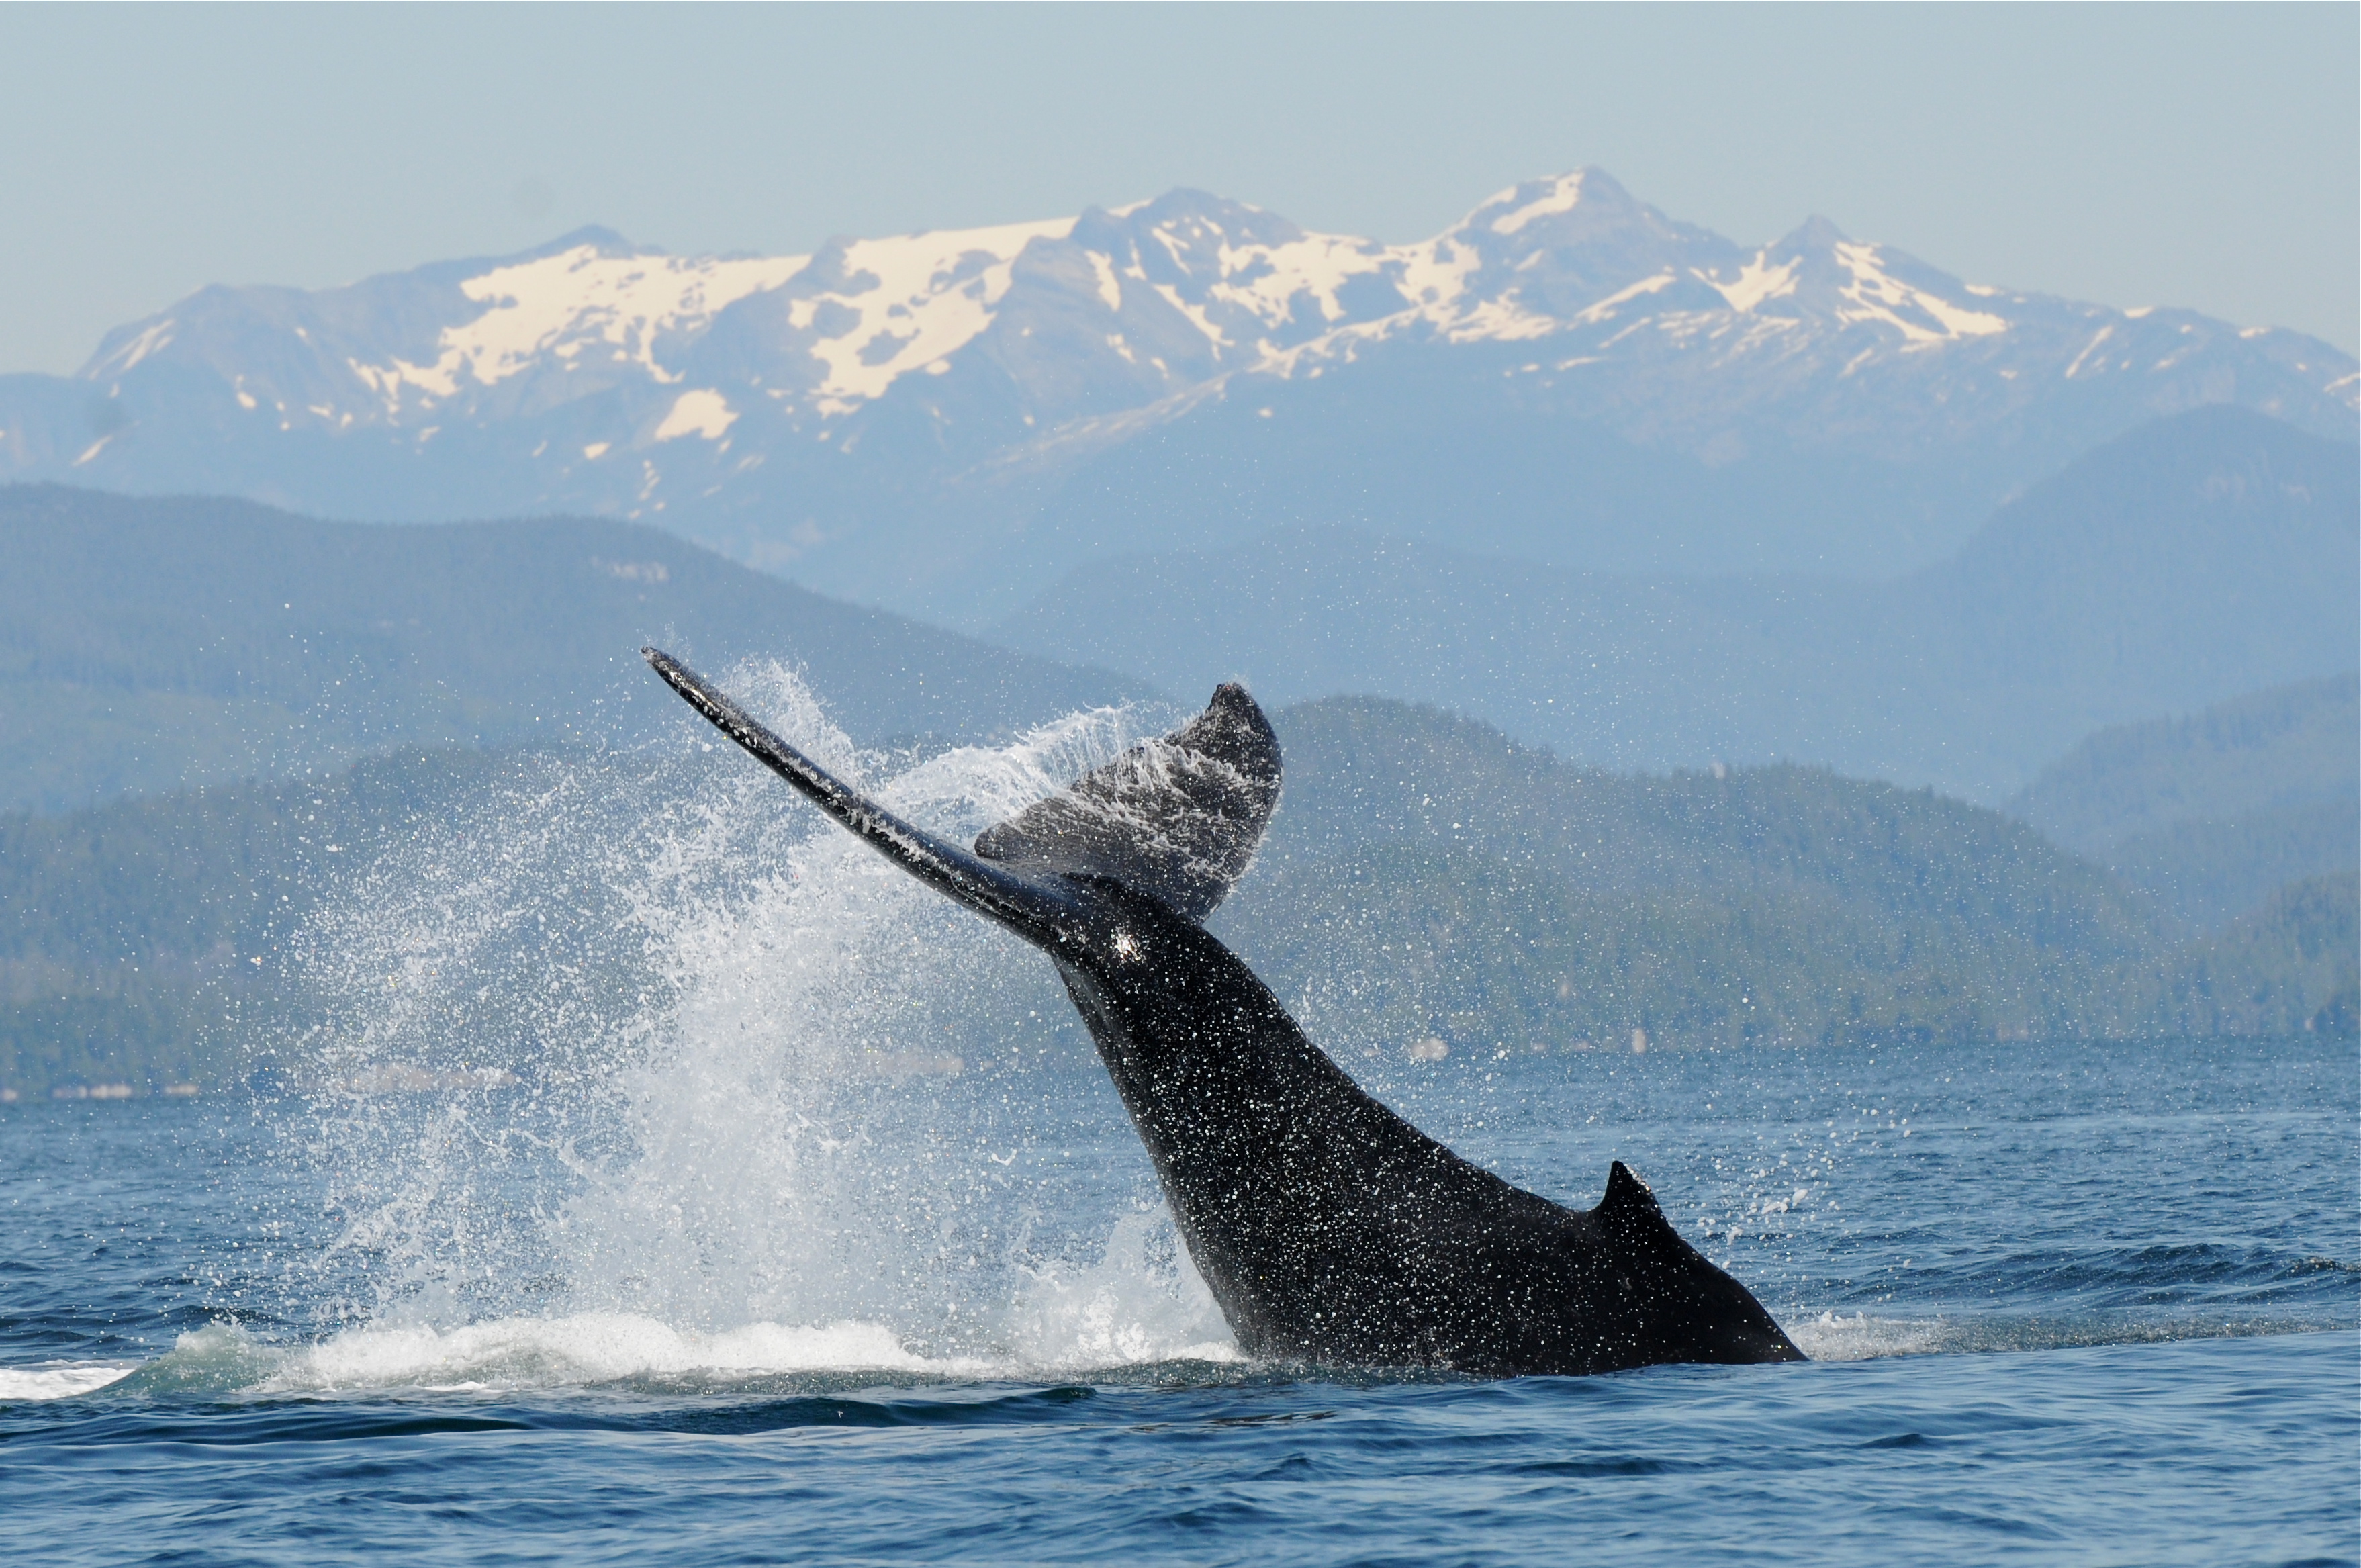 Humpback whale "Black Pearl", known to MERS since 2012, tailslapping off northern Vancouver Island (Photo by Christie McMillan, MERS)